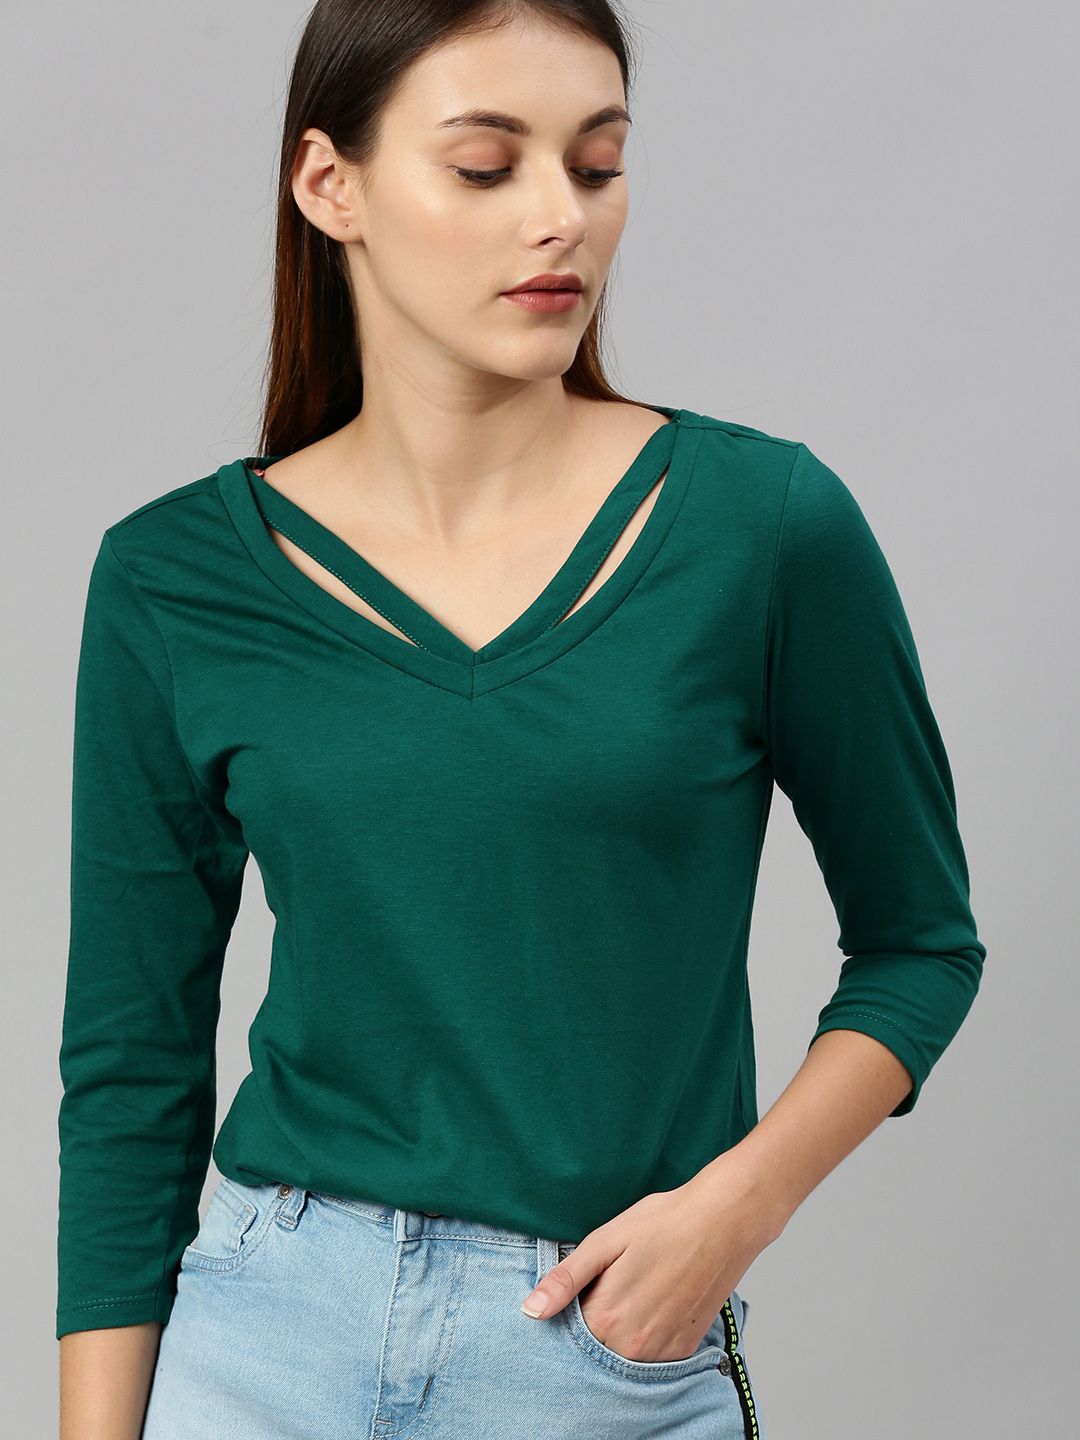 Roadster Women Green Solid Styled Neck Top Price in India